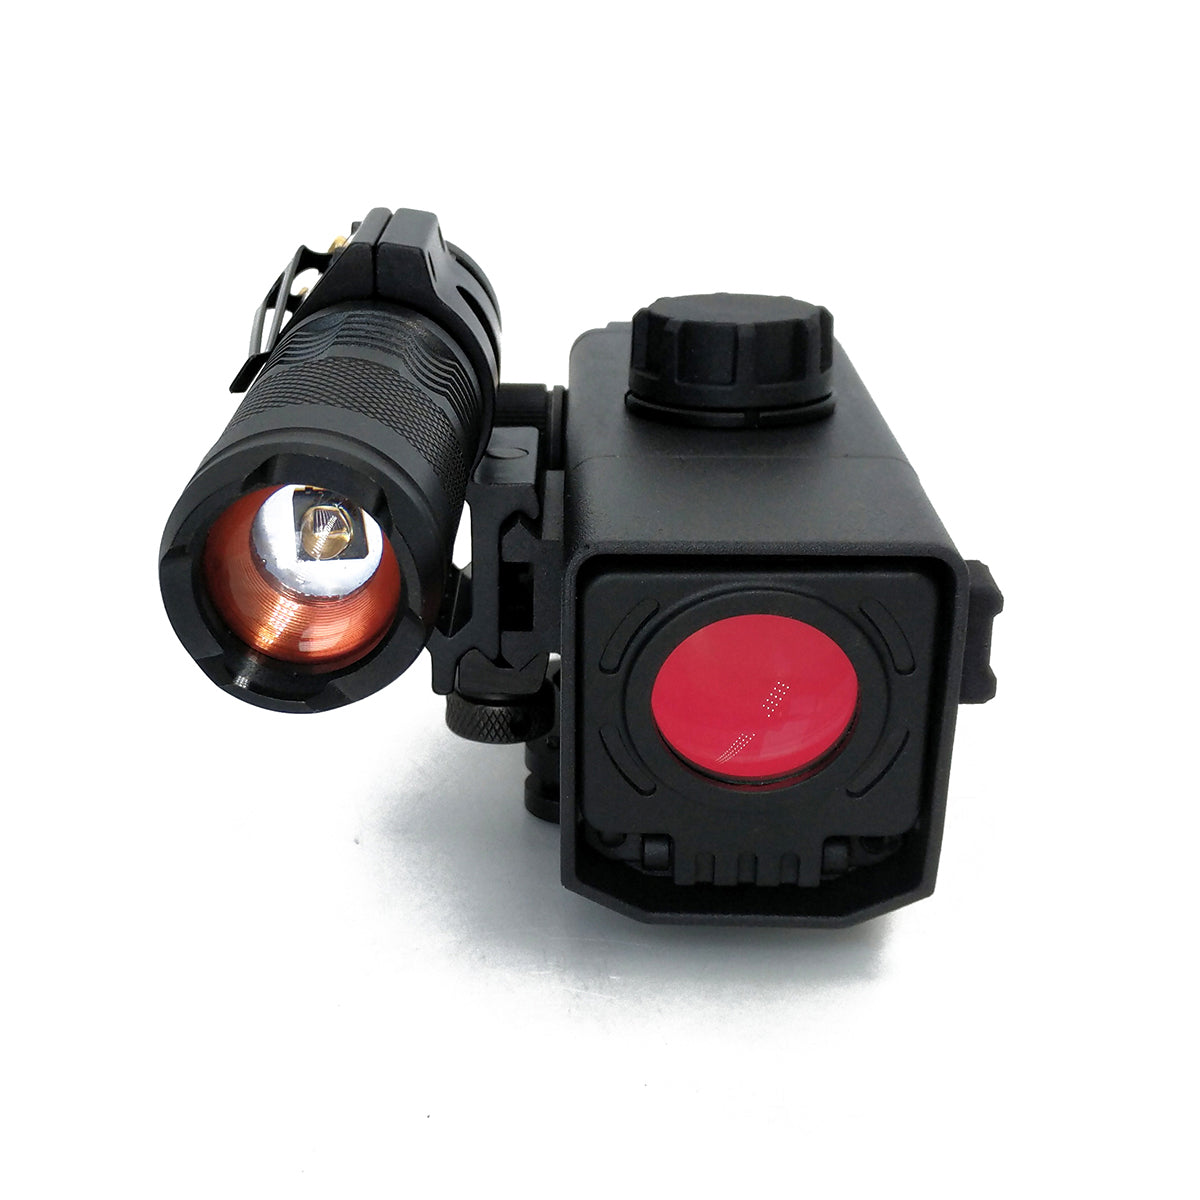 Tontube Infrared Night Vision Red Dot Digital Laser Sniper Scope with Reticle for Sale